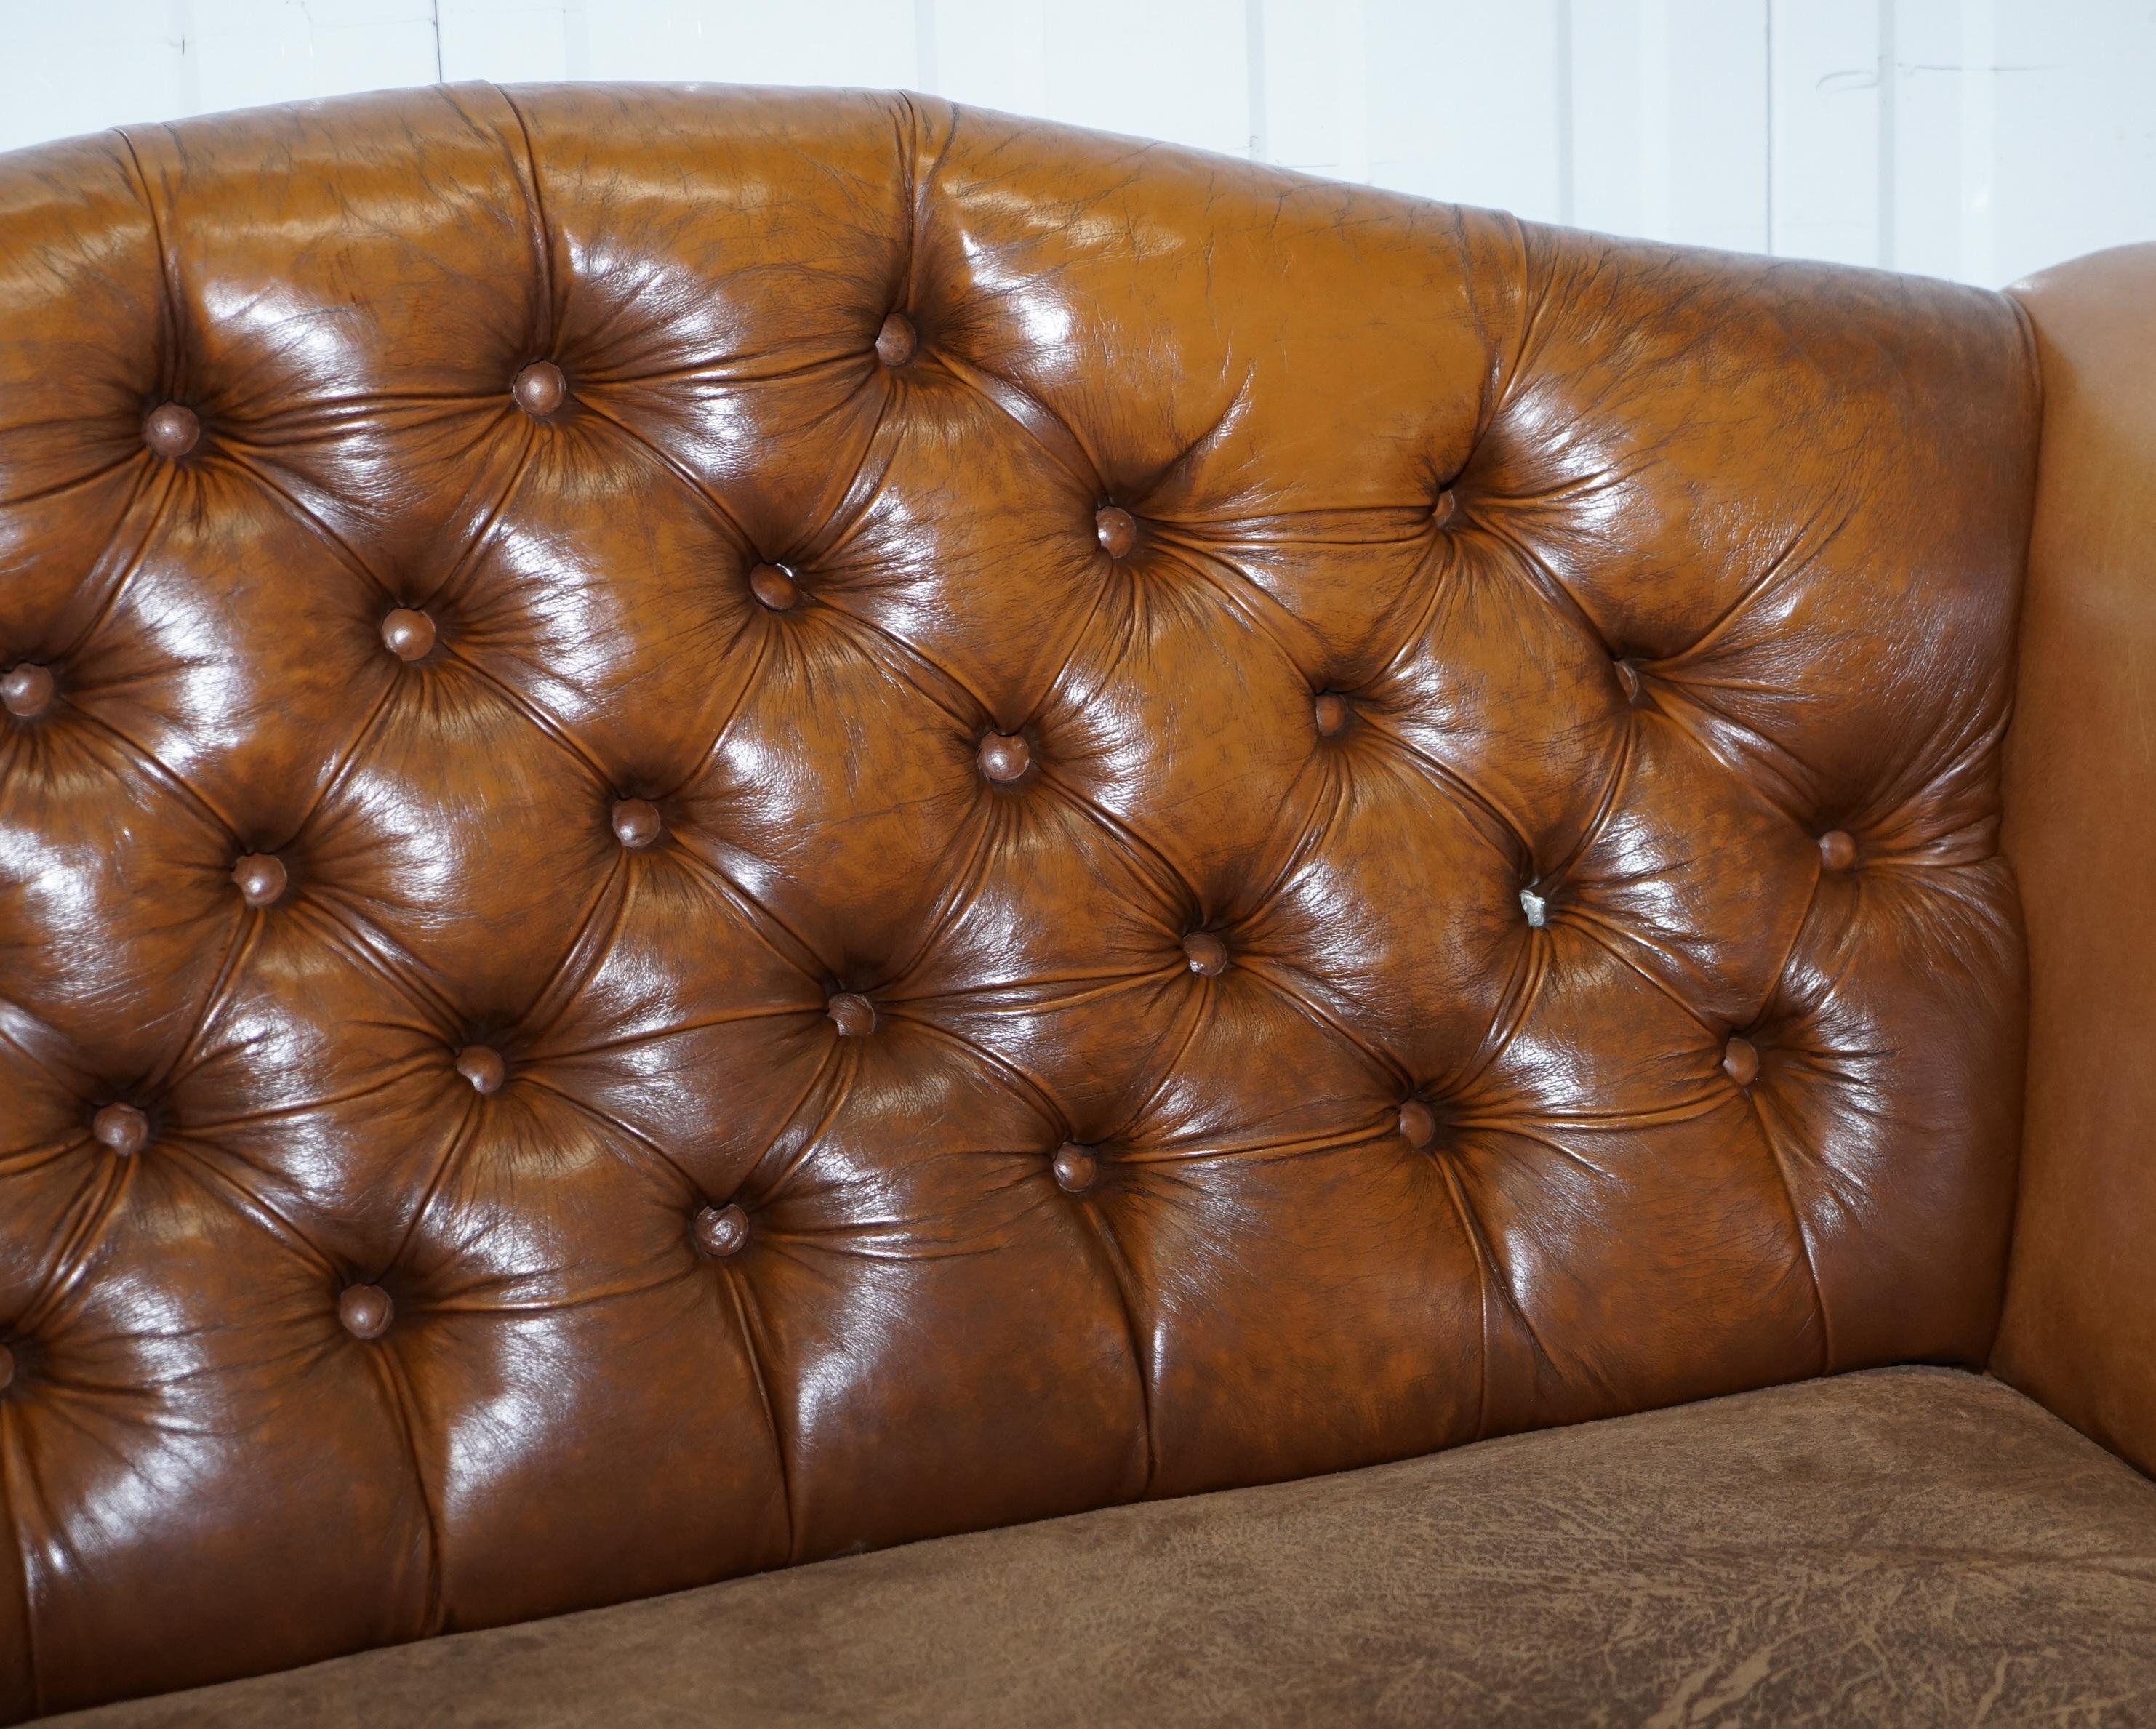 Hand-Crafted Mixed Brown Leather Chesterfield Two-Seat Club Sofa with Suede Leather Base